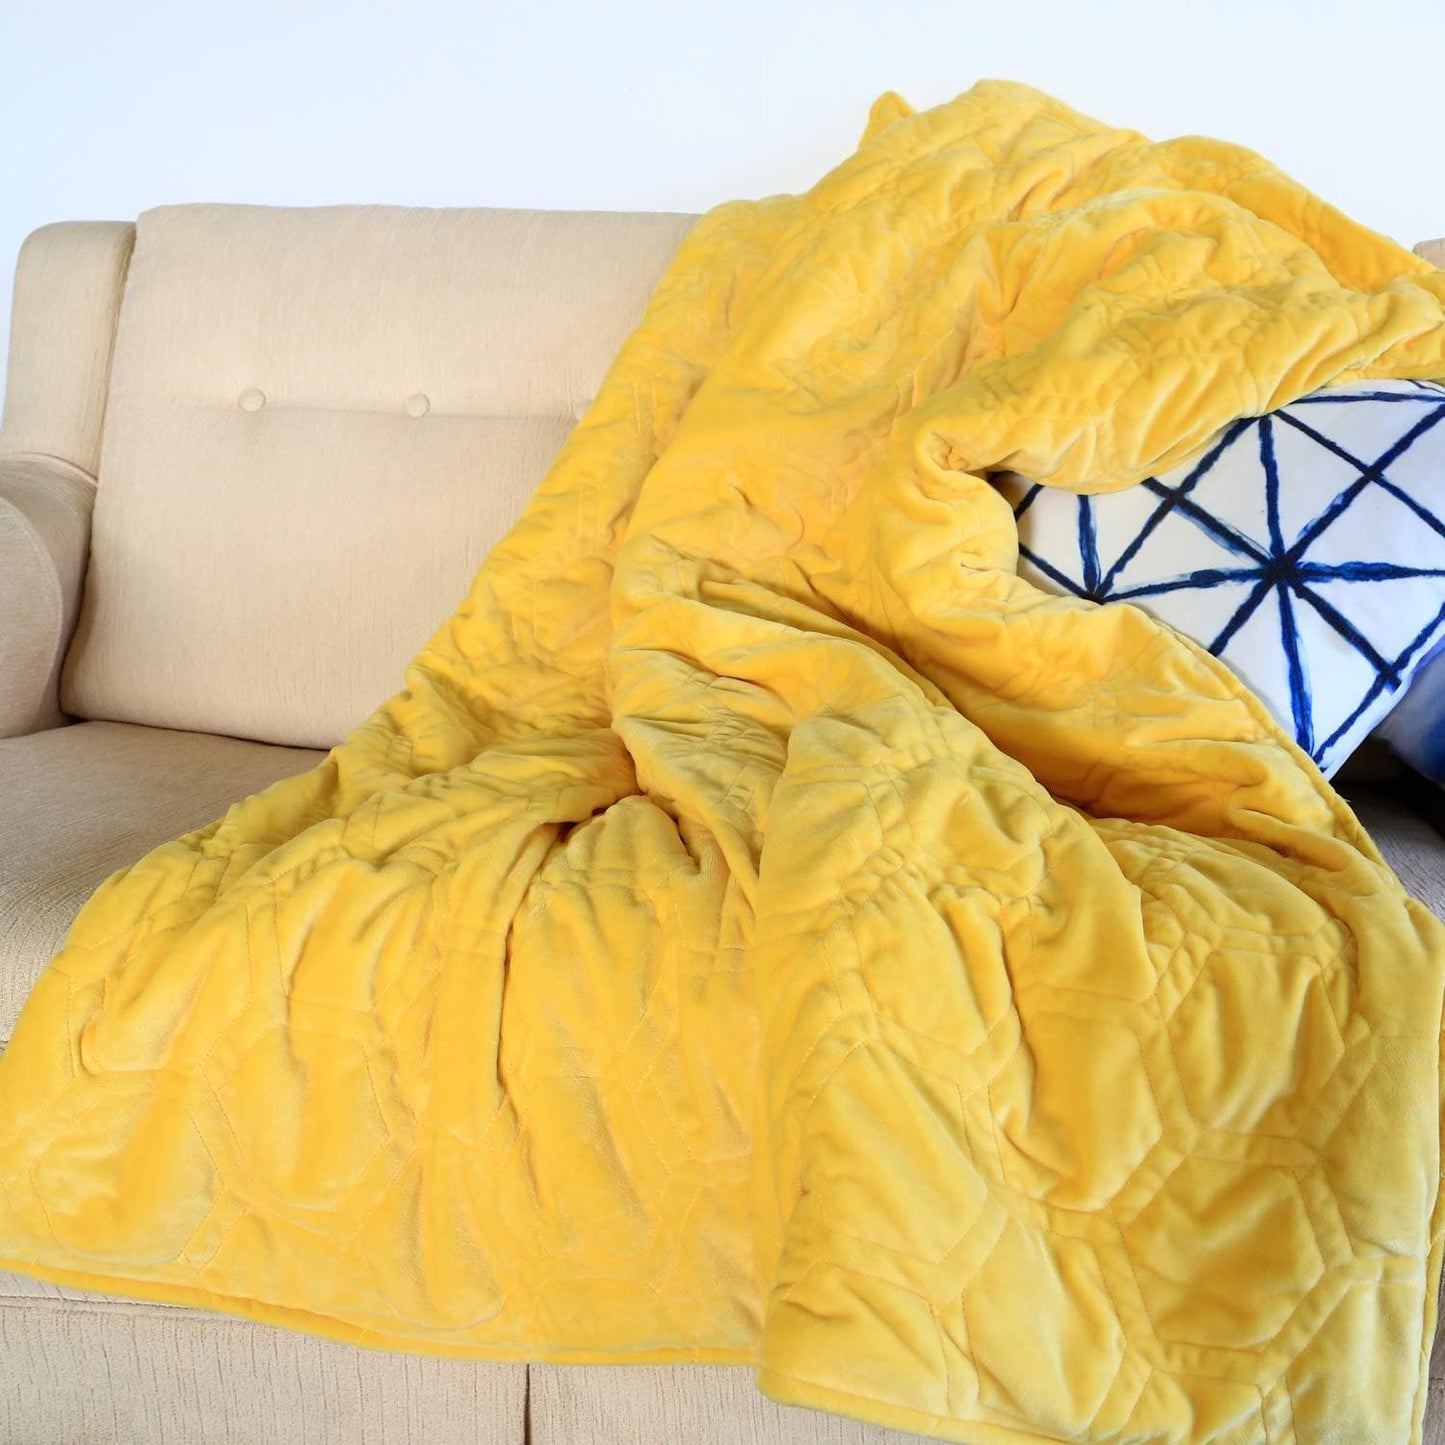 BlankyHug Cooling Weighted Blanket